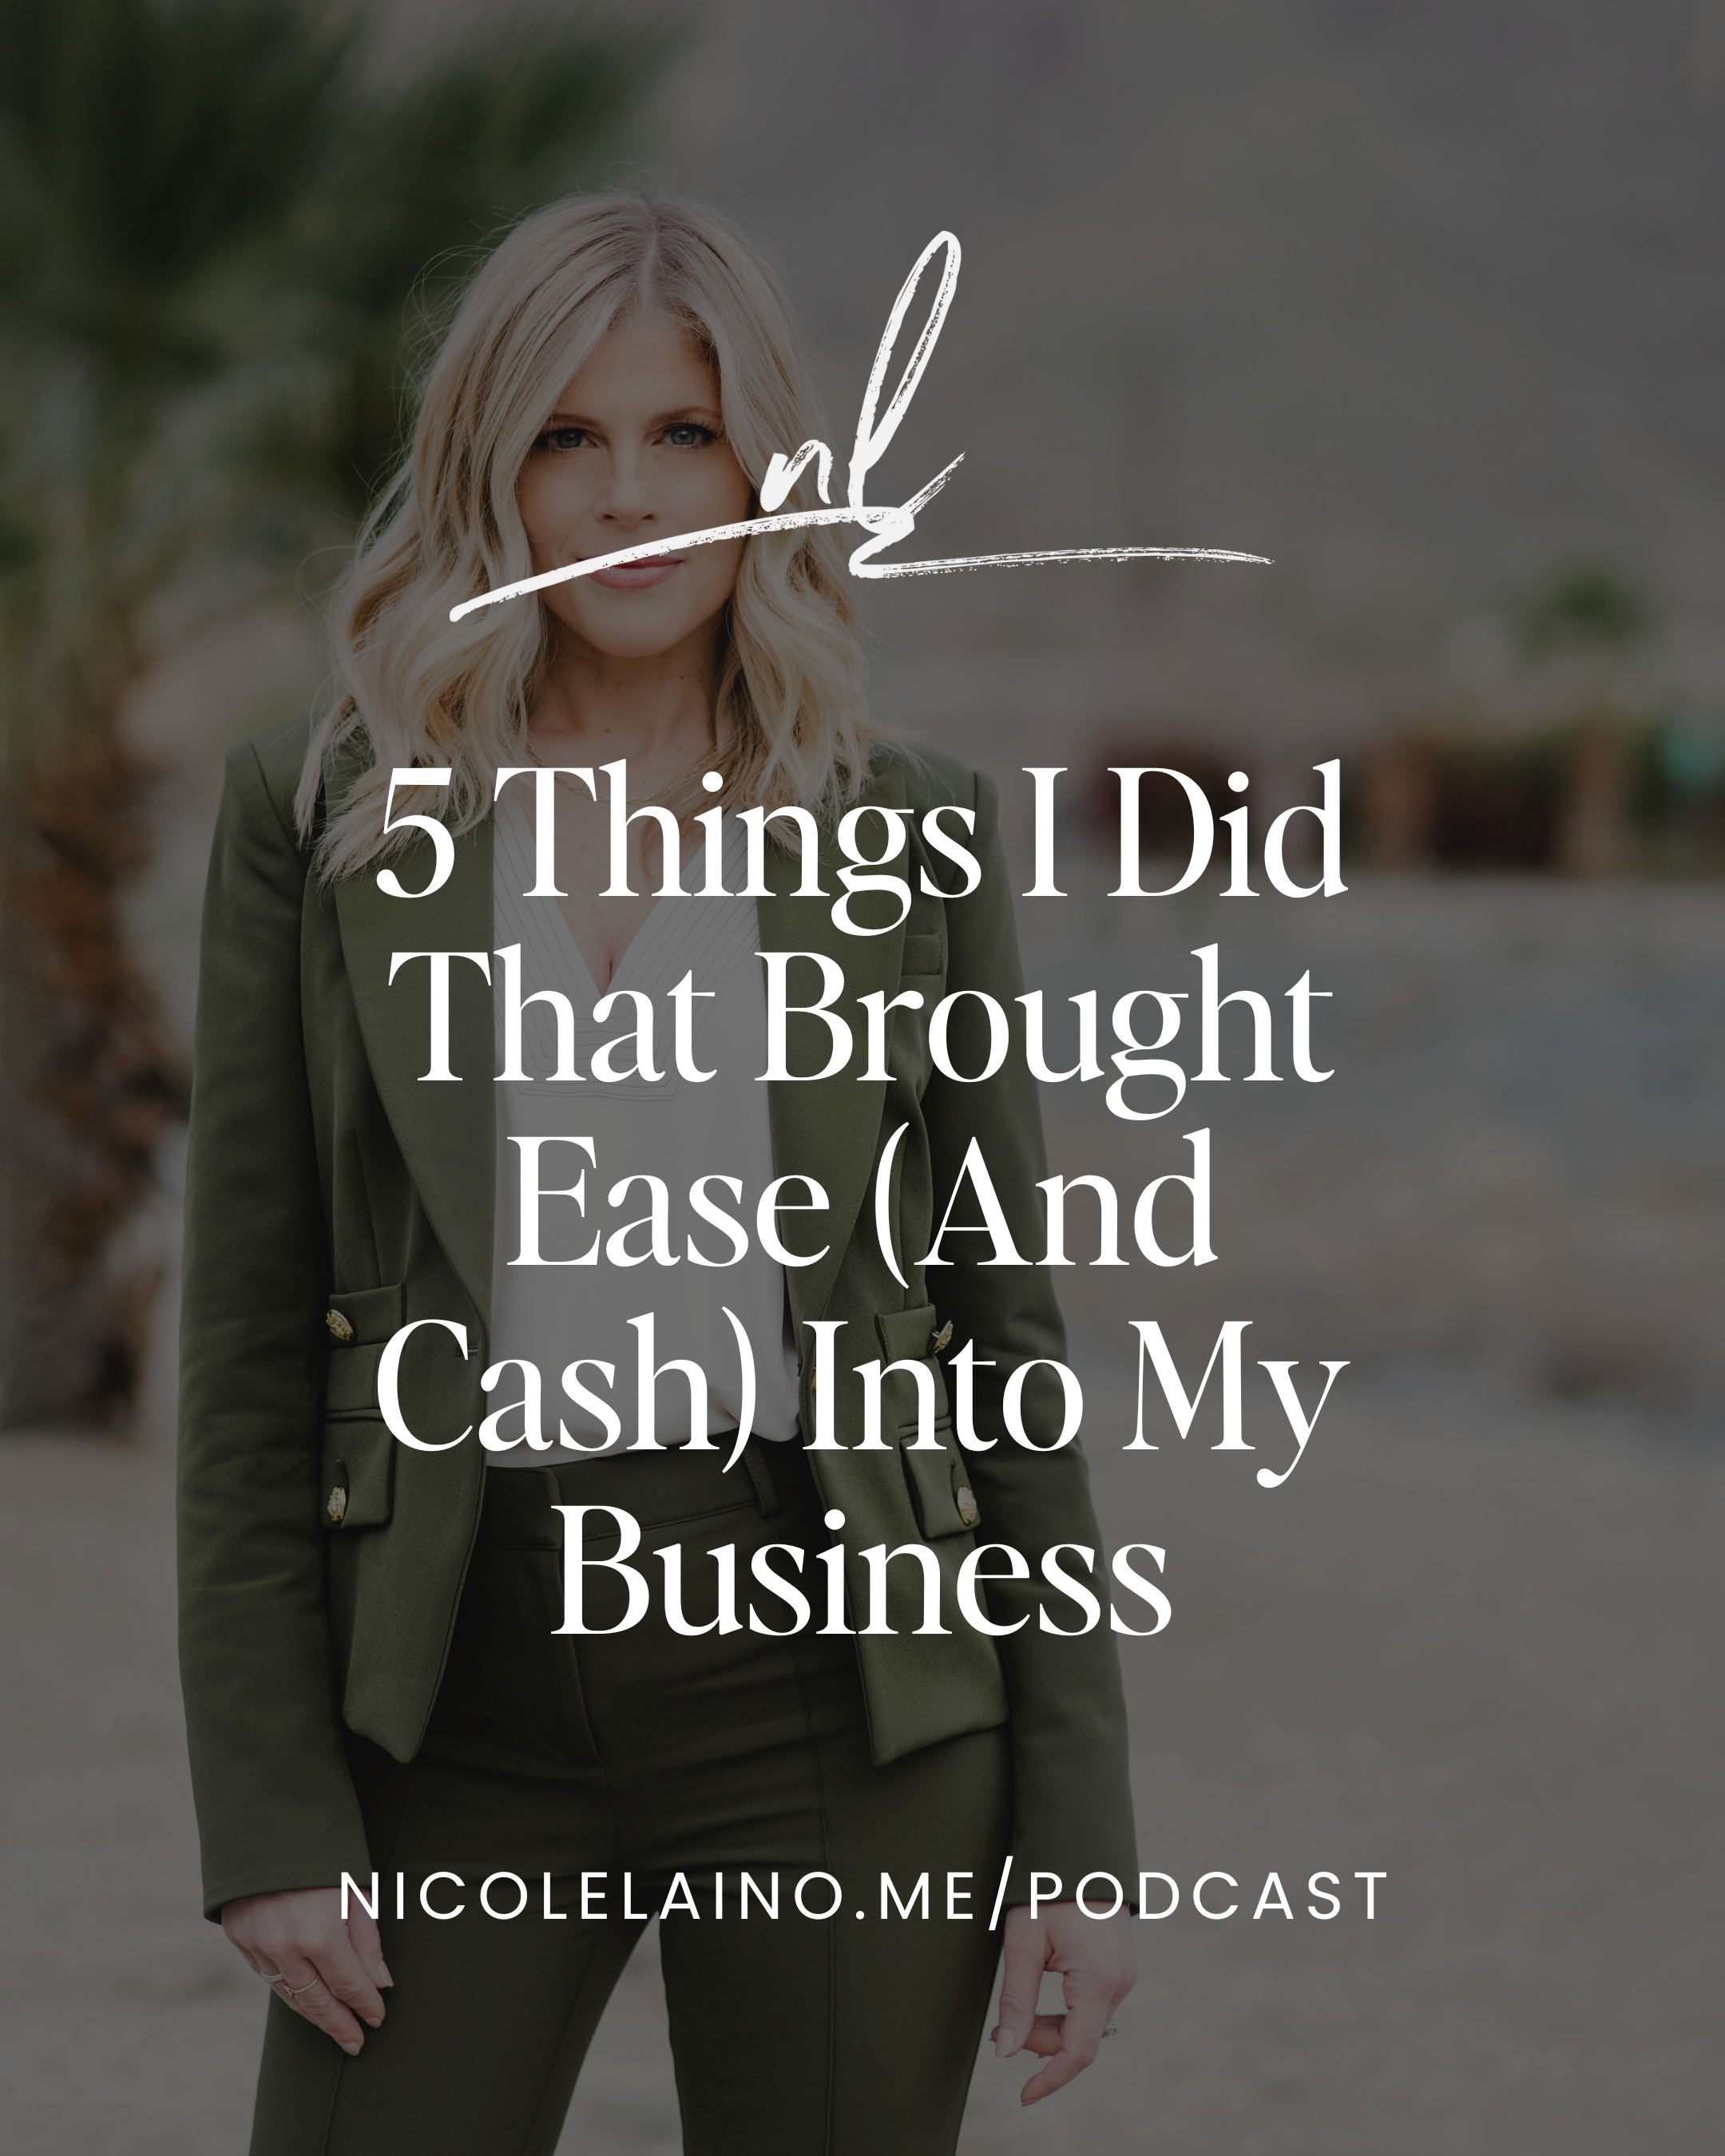 5 Things I Did That Brought Ease (And Cash) Into My Business